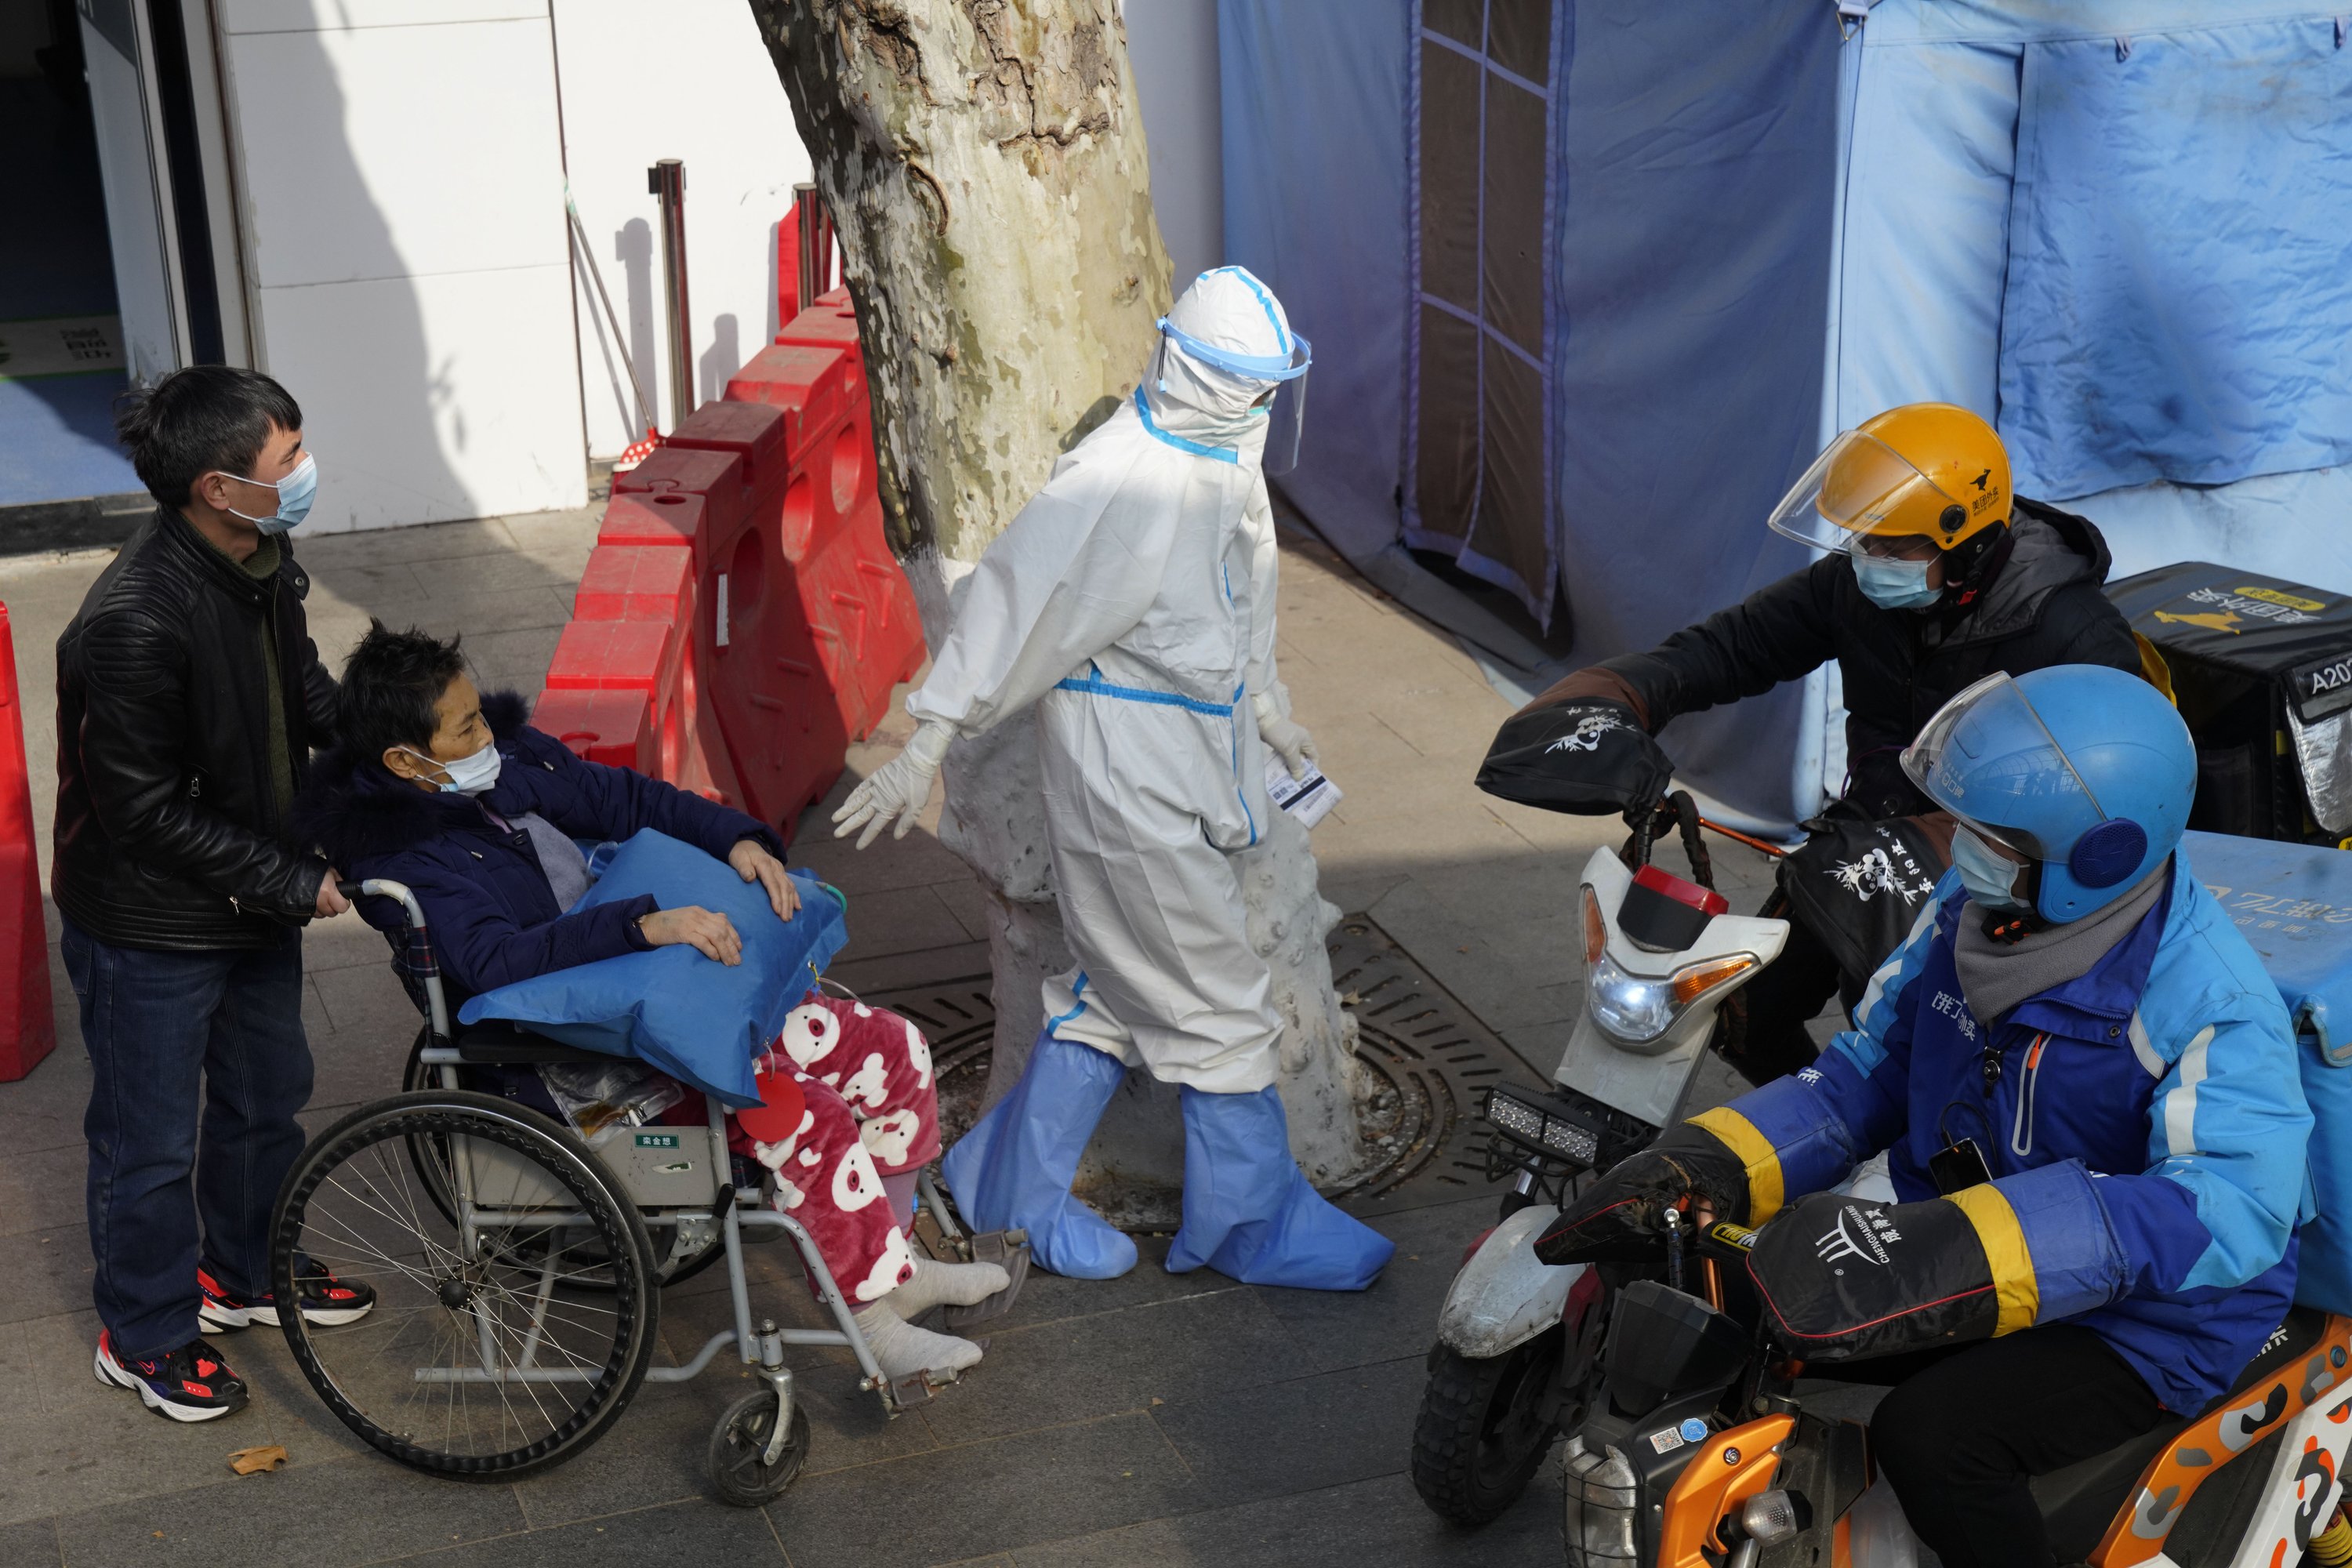 China builds new quarantine center as virus cases rise - The Associated Press